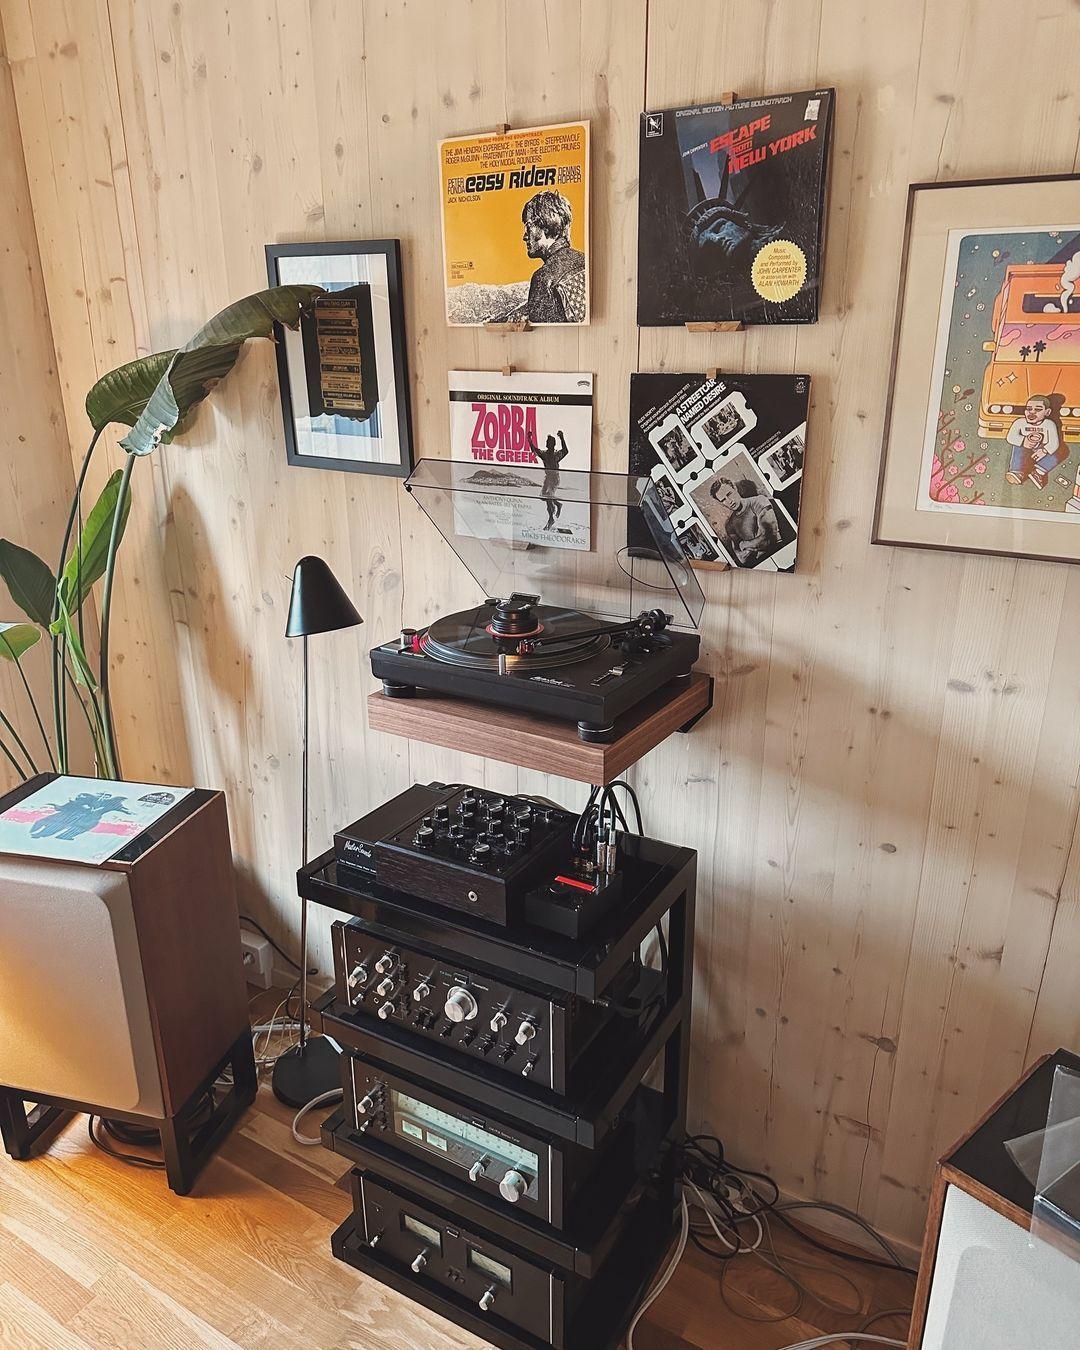 A Personal Spin on Hi-Fi Heritage